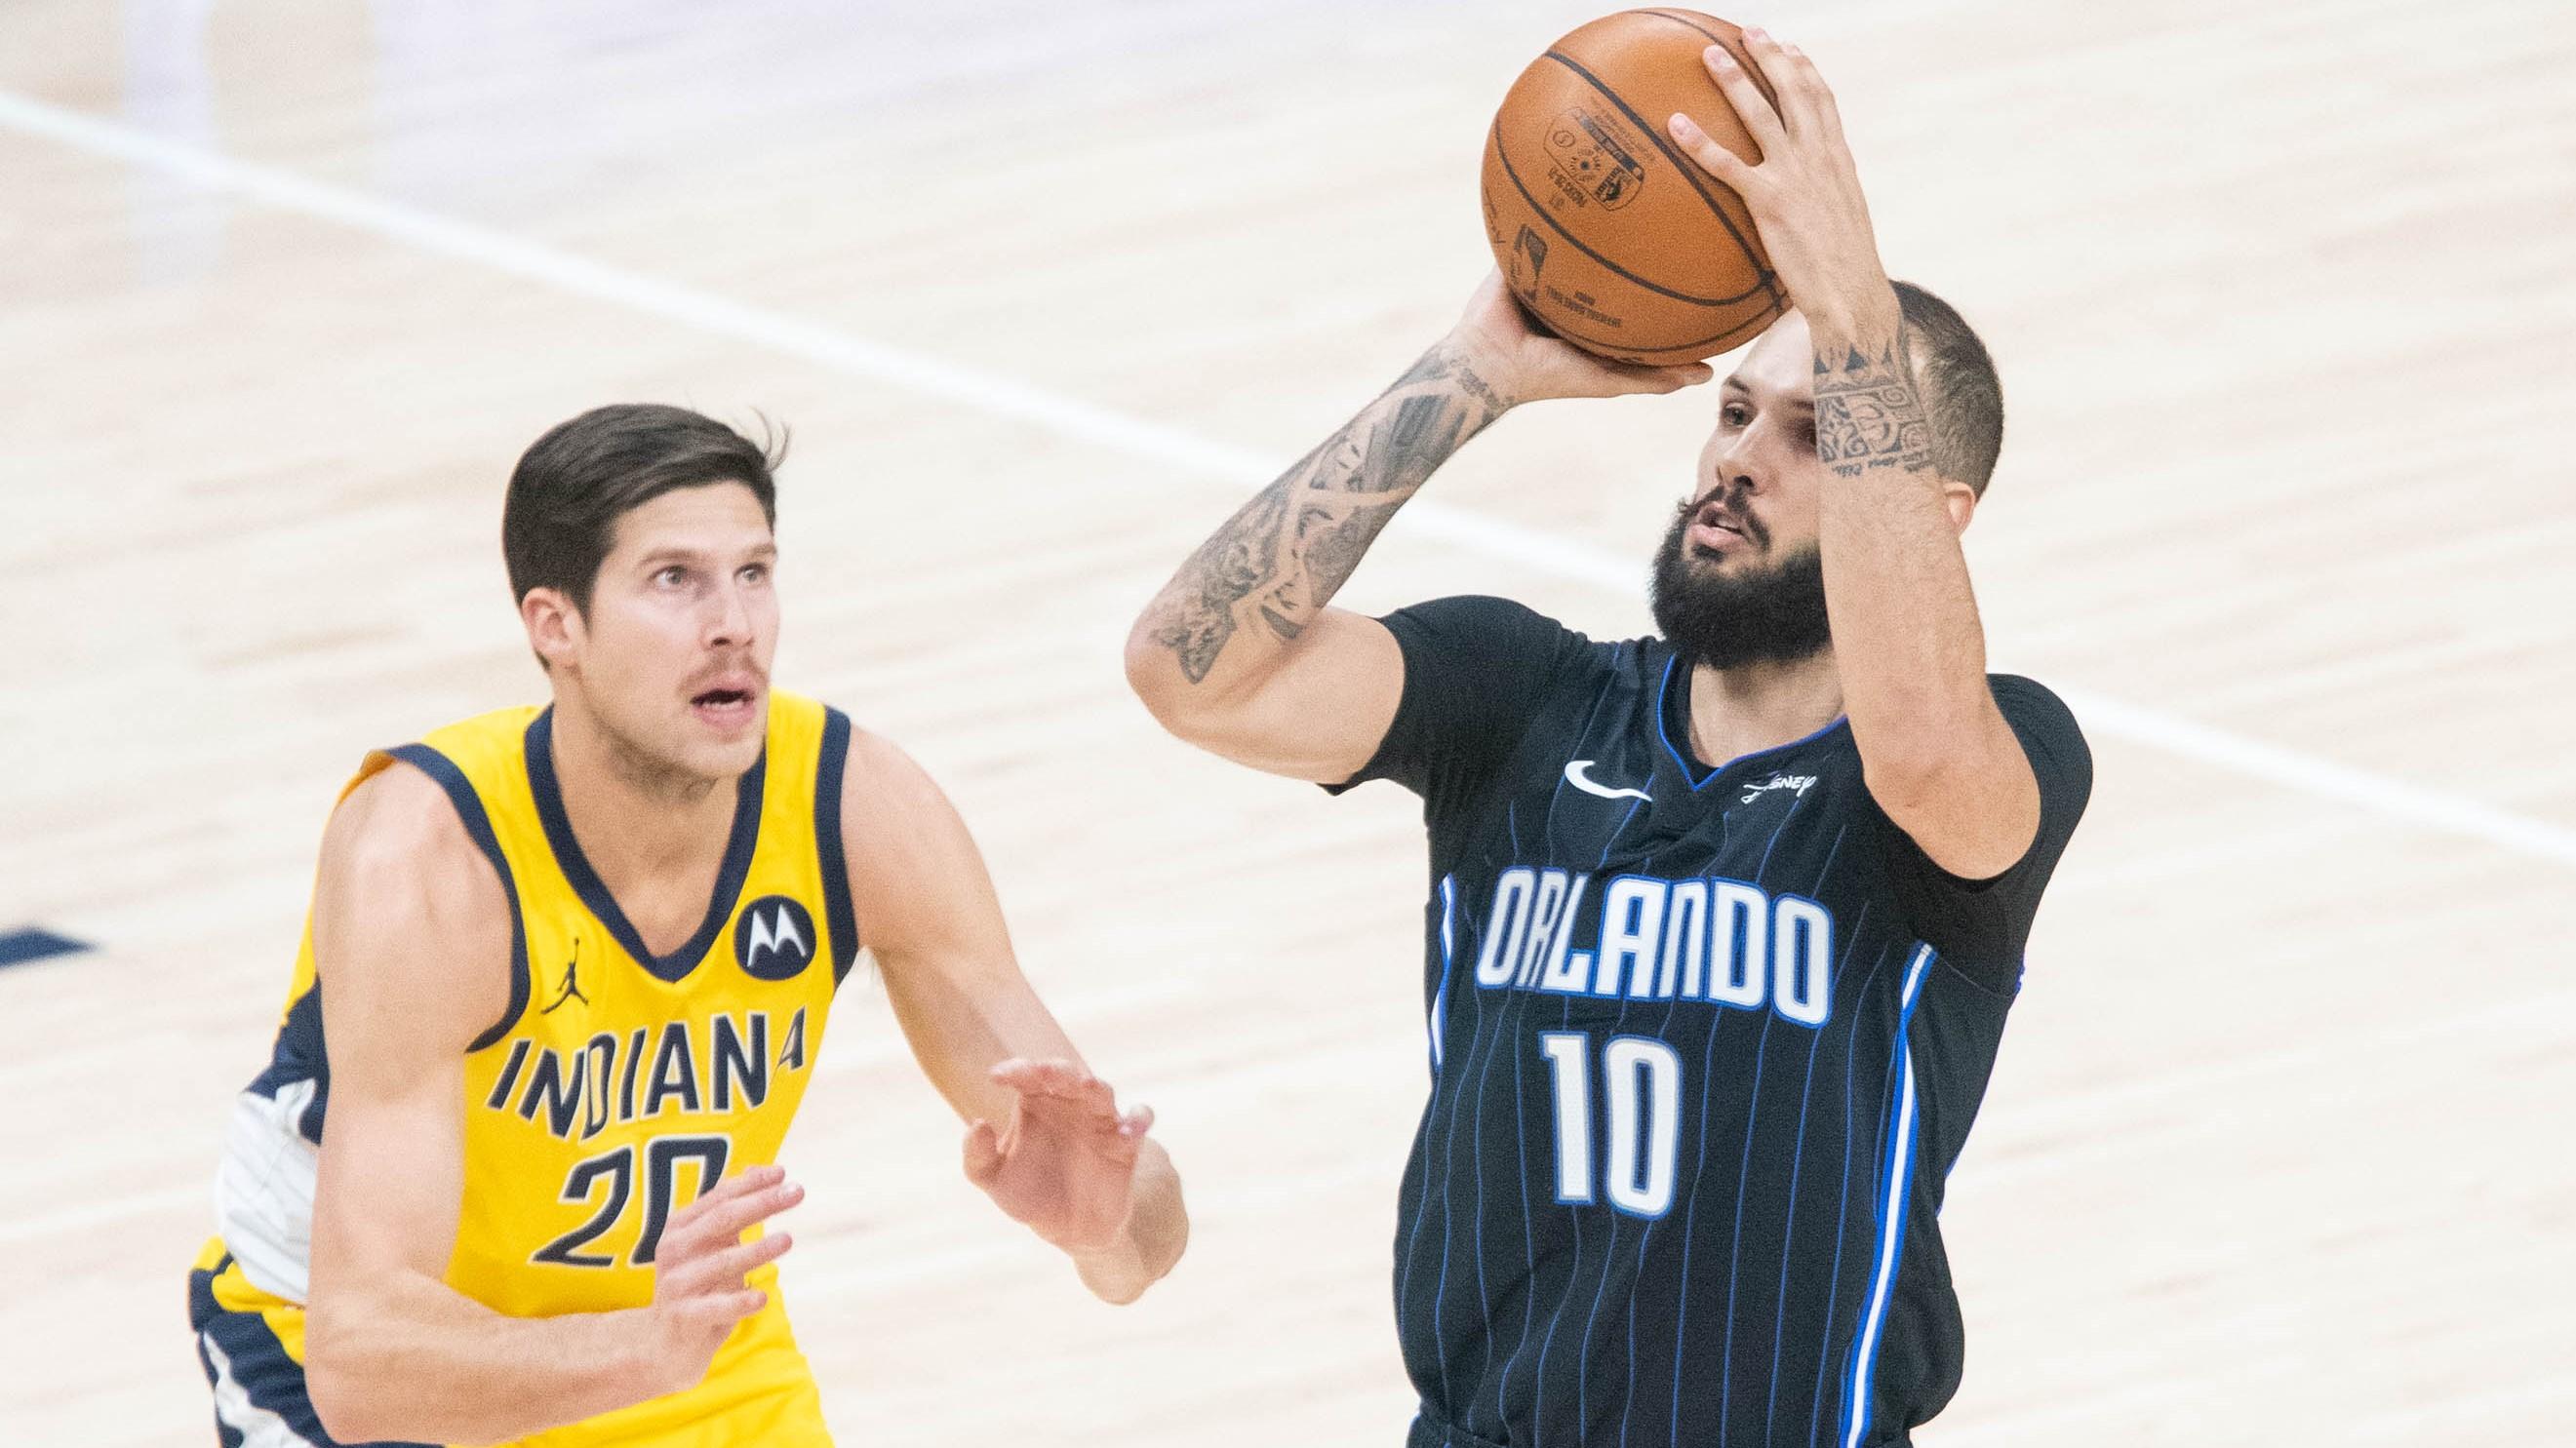 Jan 22, 2021; Indianapolis, Indiana, USA; Orlando Magic guard Evan Fournier (10) shoots the ball while Indiana Pacers forward Doug McDermott (20) defends in the second quarter at Bankers Life Fieldhouse. / Trevor Ruszkowski-USA TODAY Sports